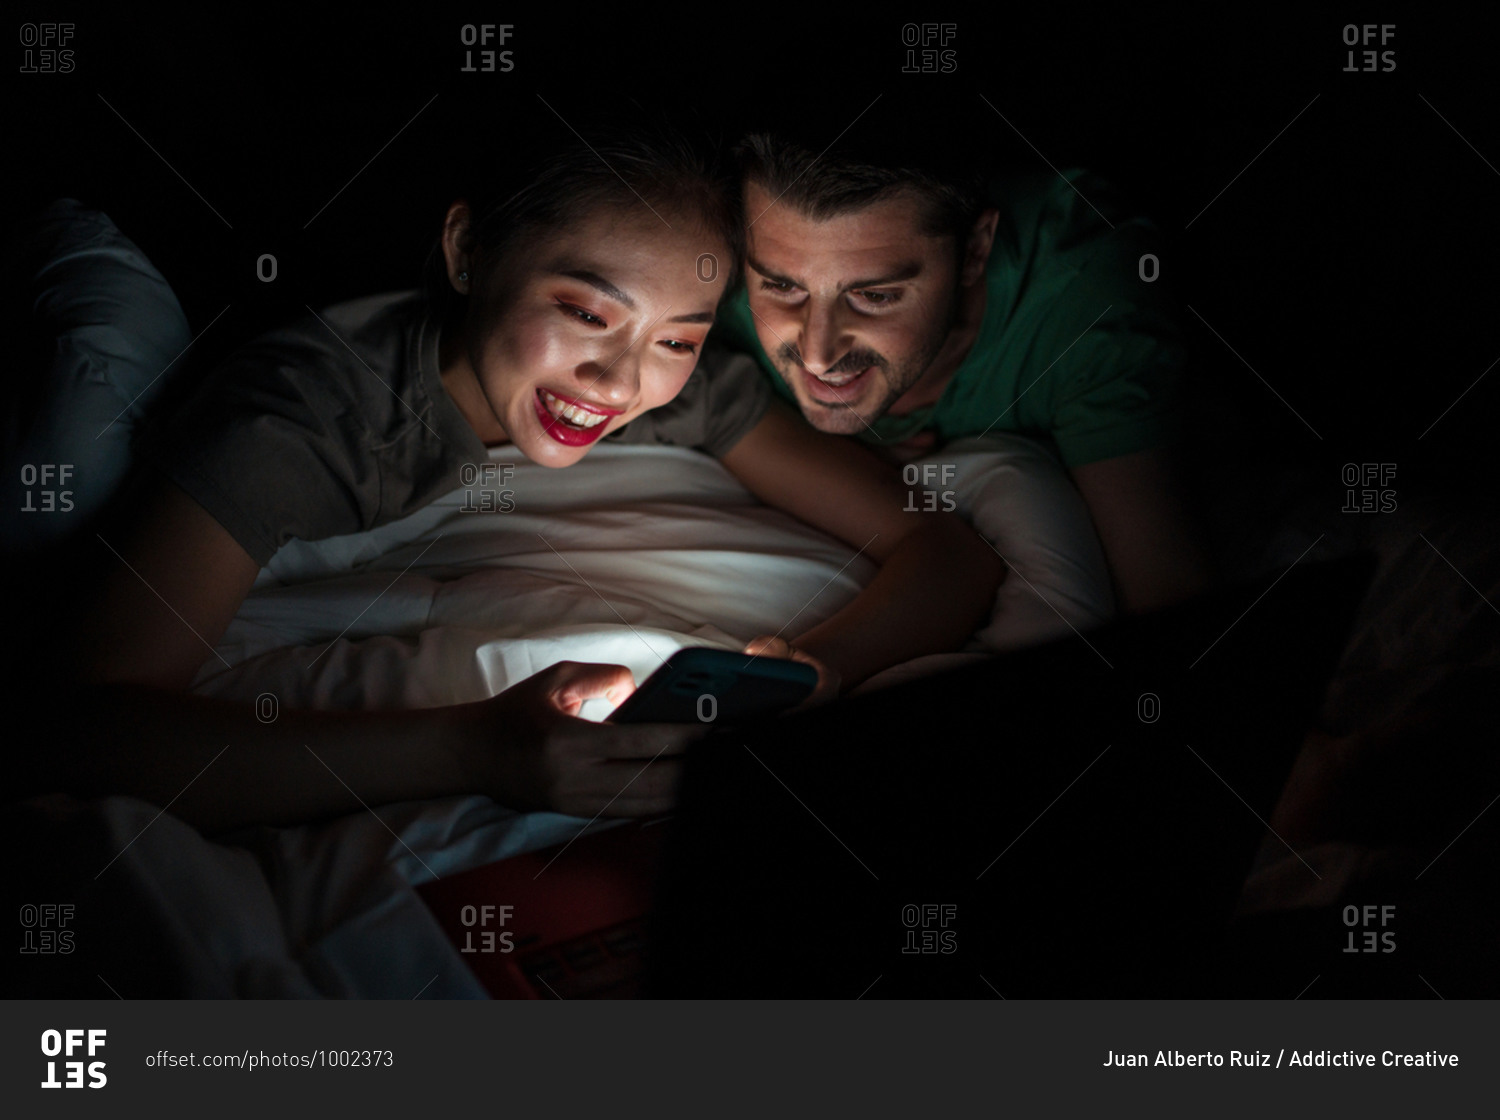 Cheerful young Asian woman using social media on cellphone while lying with happy boyfriend in bed at night in apartment